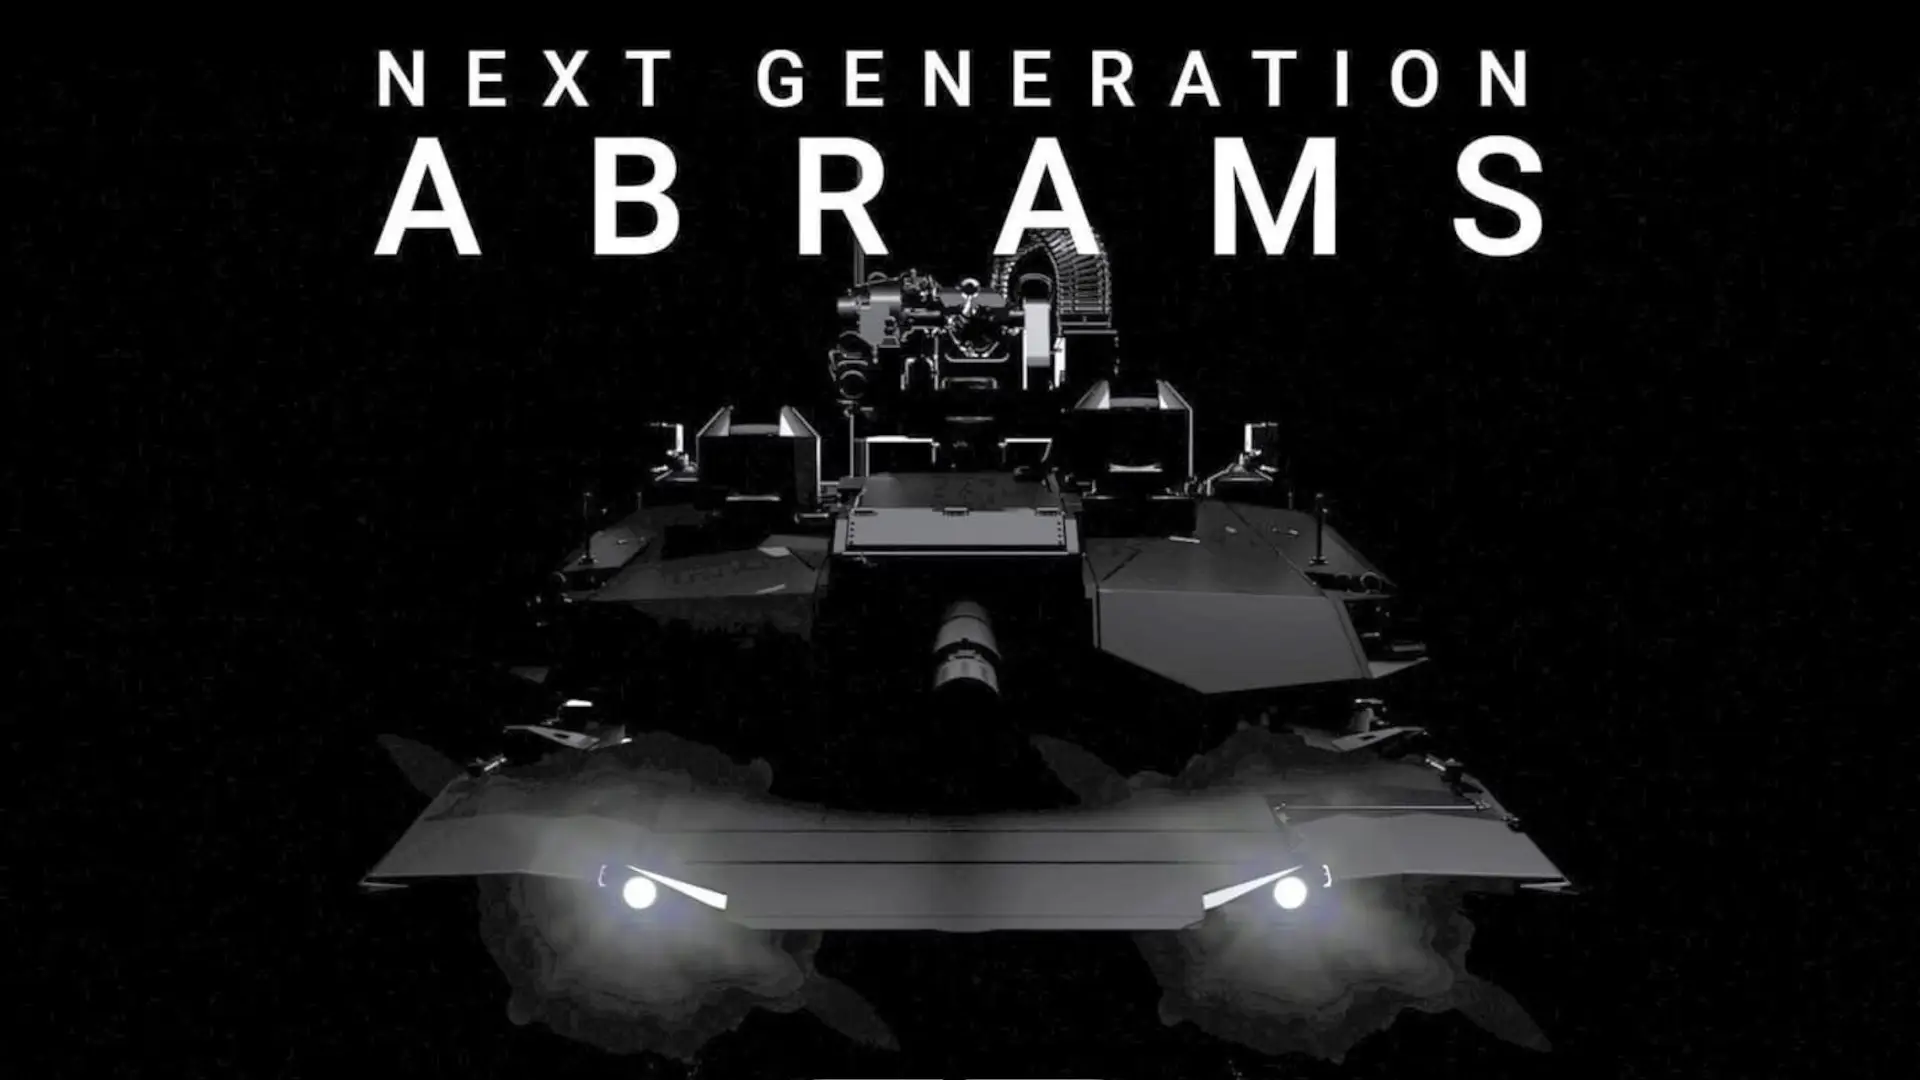 GDLS showed a new generation of the legendary tank Abrams